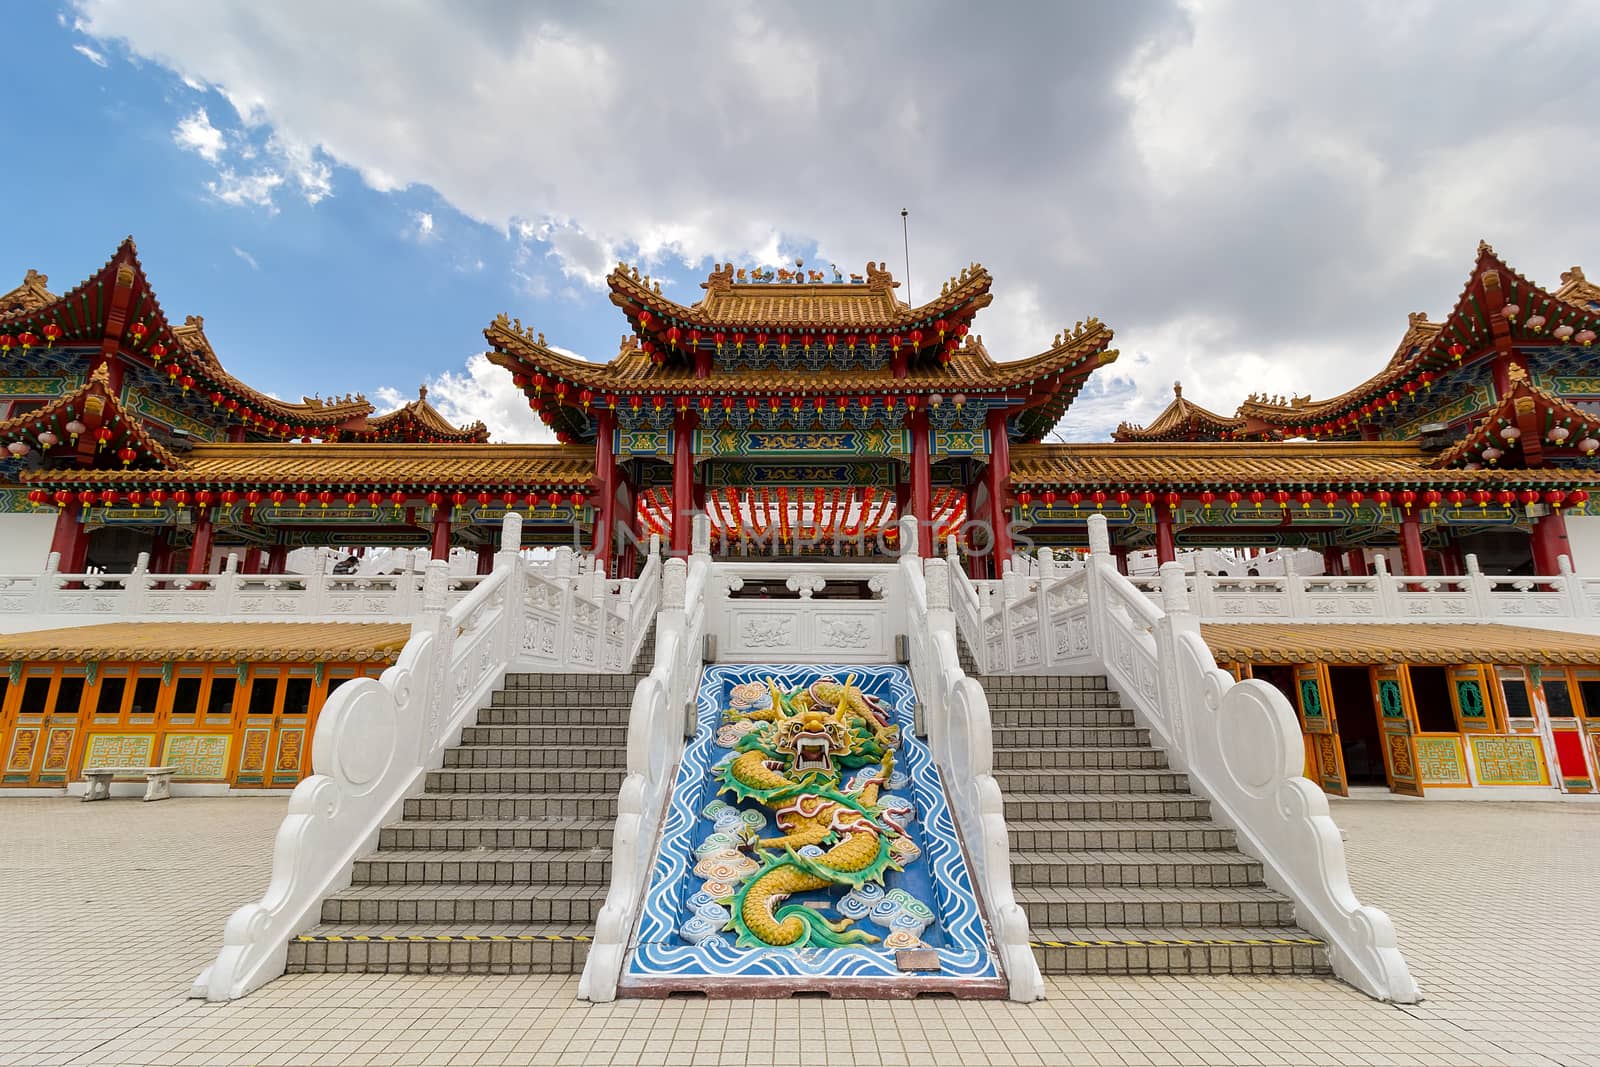 Thean Hou Temple Courtyard by jpldesigns